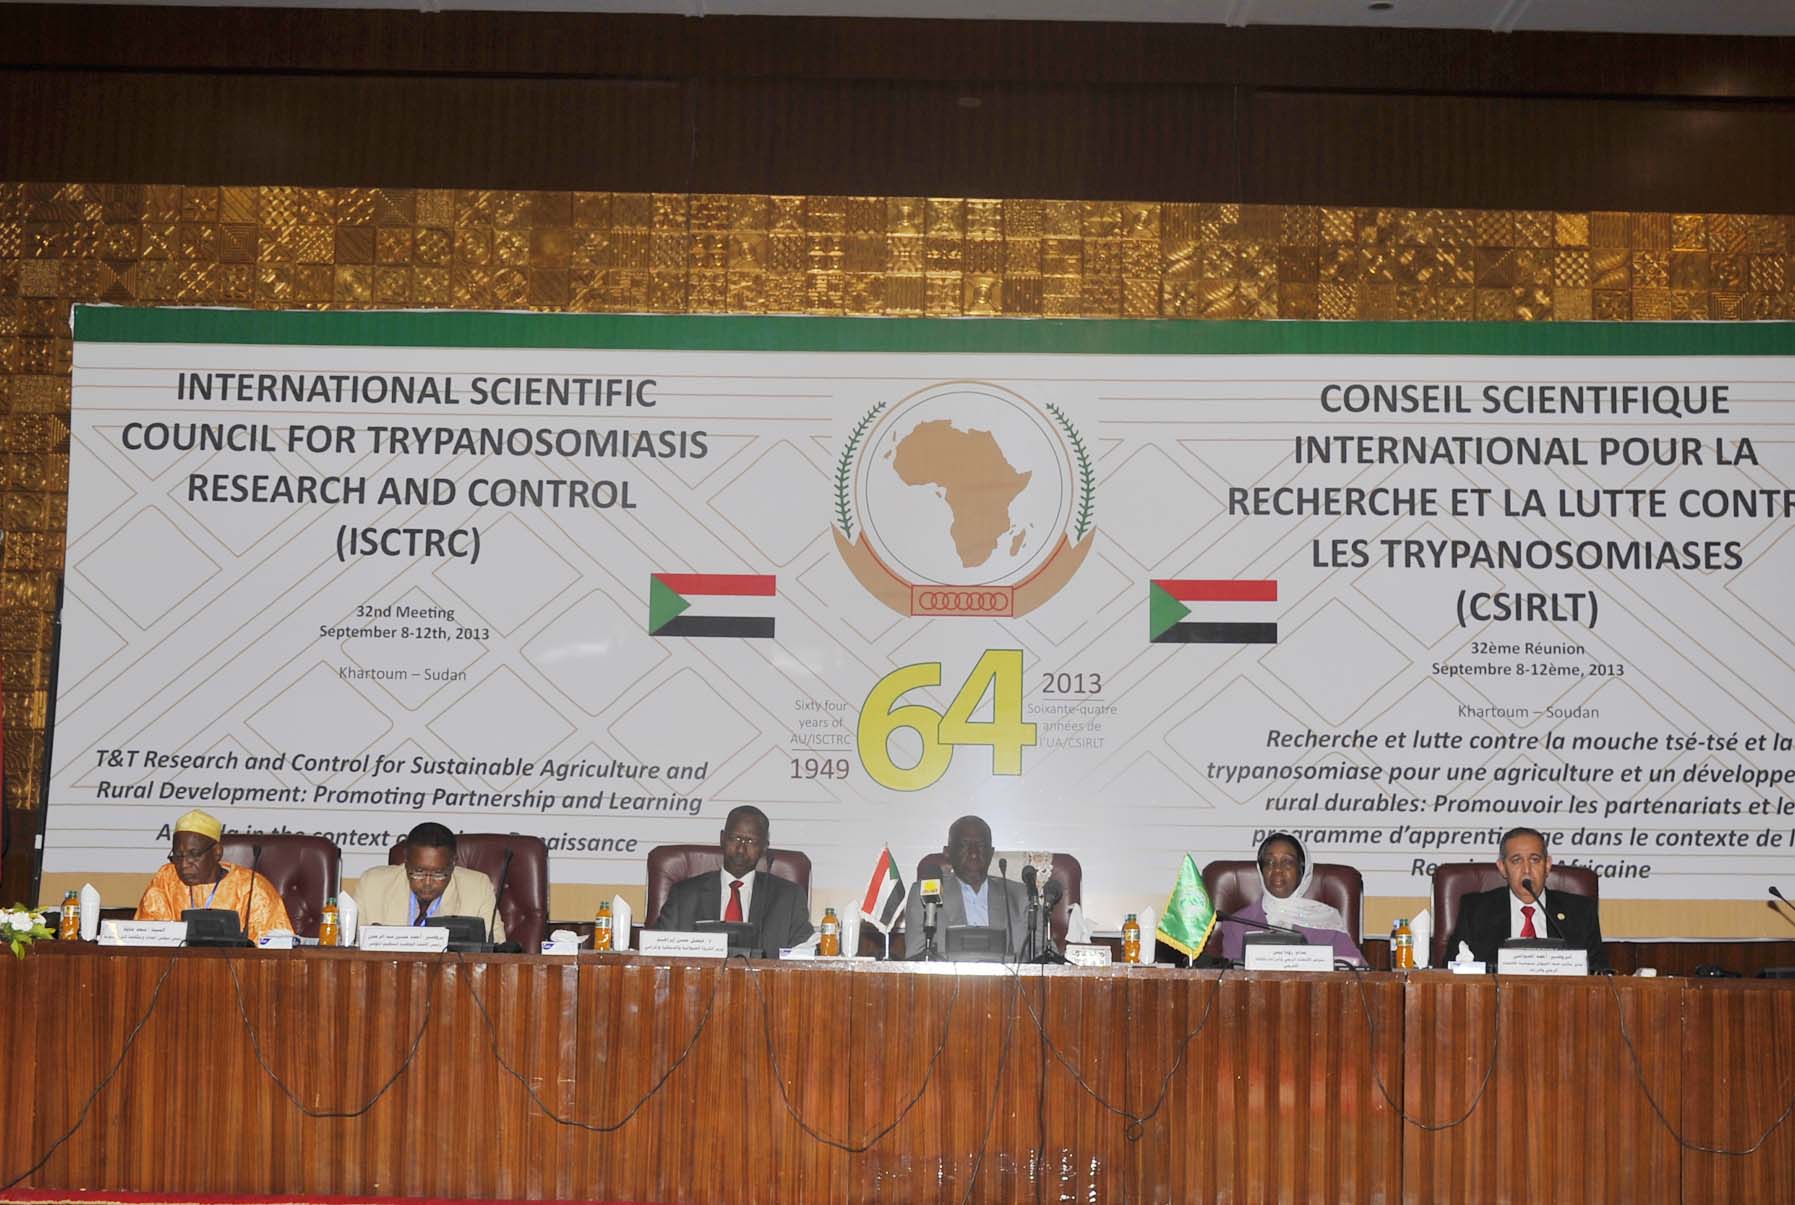  © 2013 AU-IBAR. His Excellency, First Vice President, of The Sudan, Honourable Ali Osman Mohamed Taha while opening the 32nd Conference of the International Scientific Council for Trypanosomiasis Research and Control (ISCTRC) in Khartoum Sudan on 8th September 2013